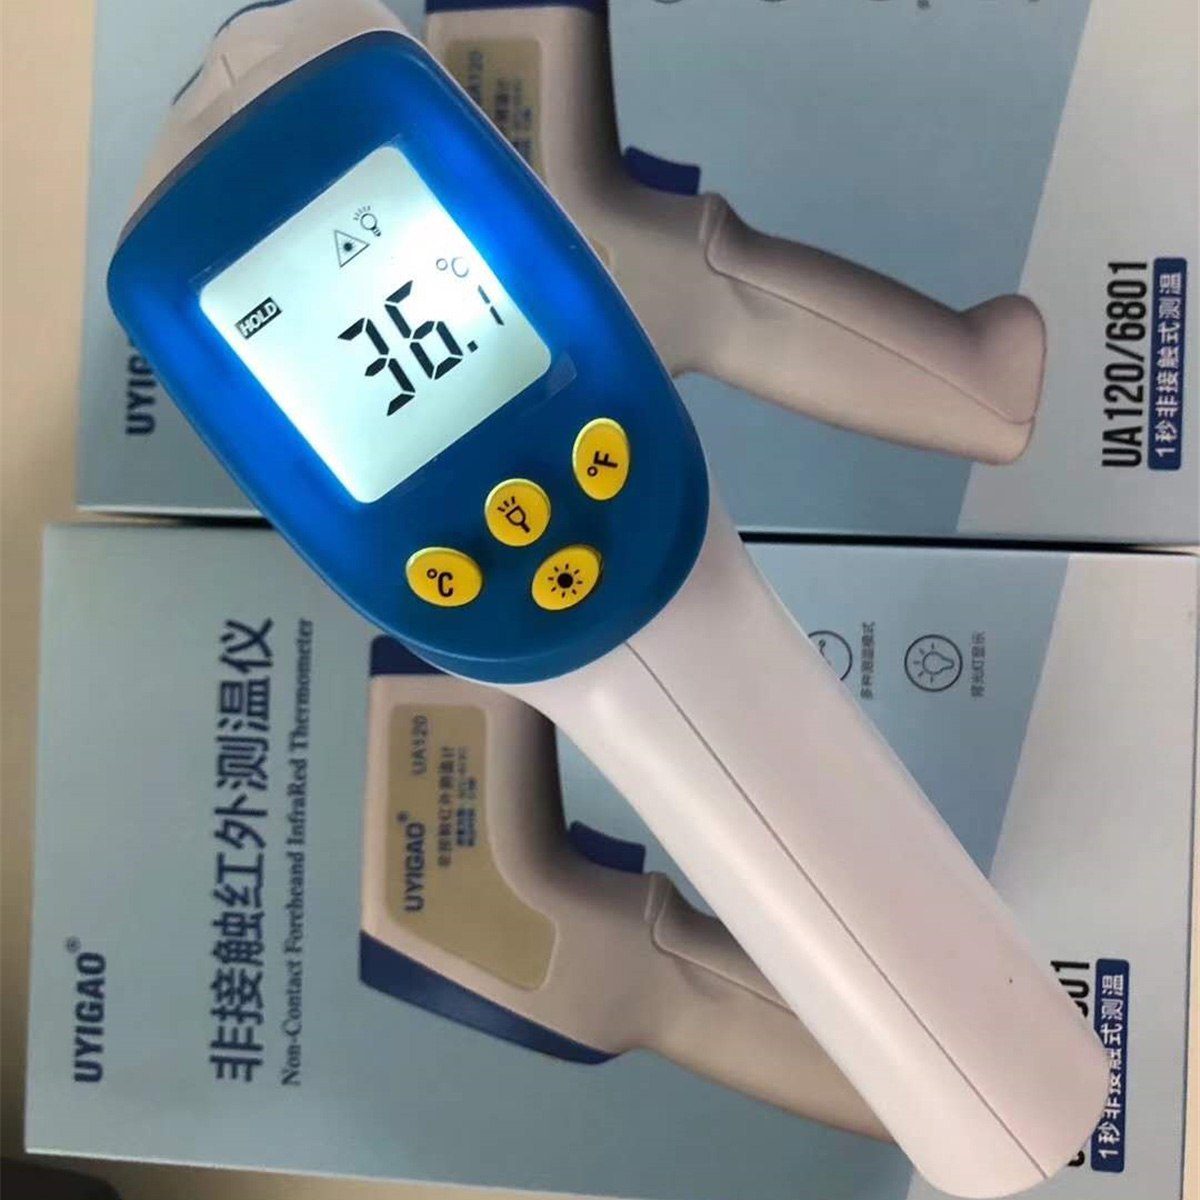 LCD-Digital-Non-contact-Touch-Infrared-Thermometer-Forehead-Temperature-Meter-1653228-3